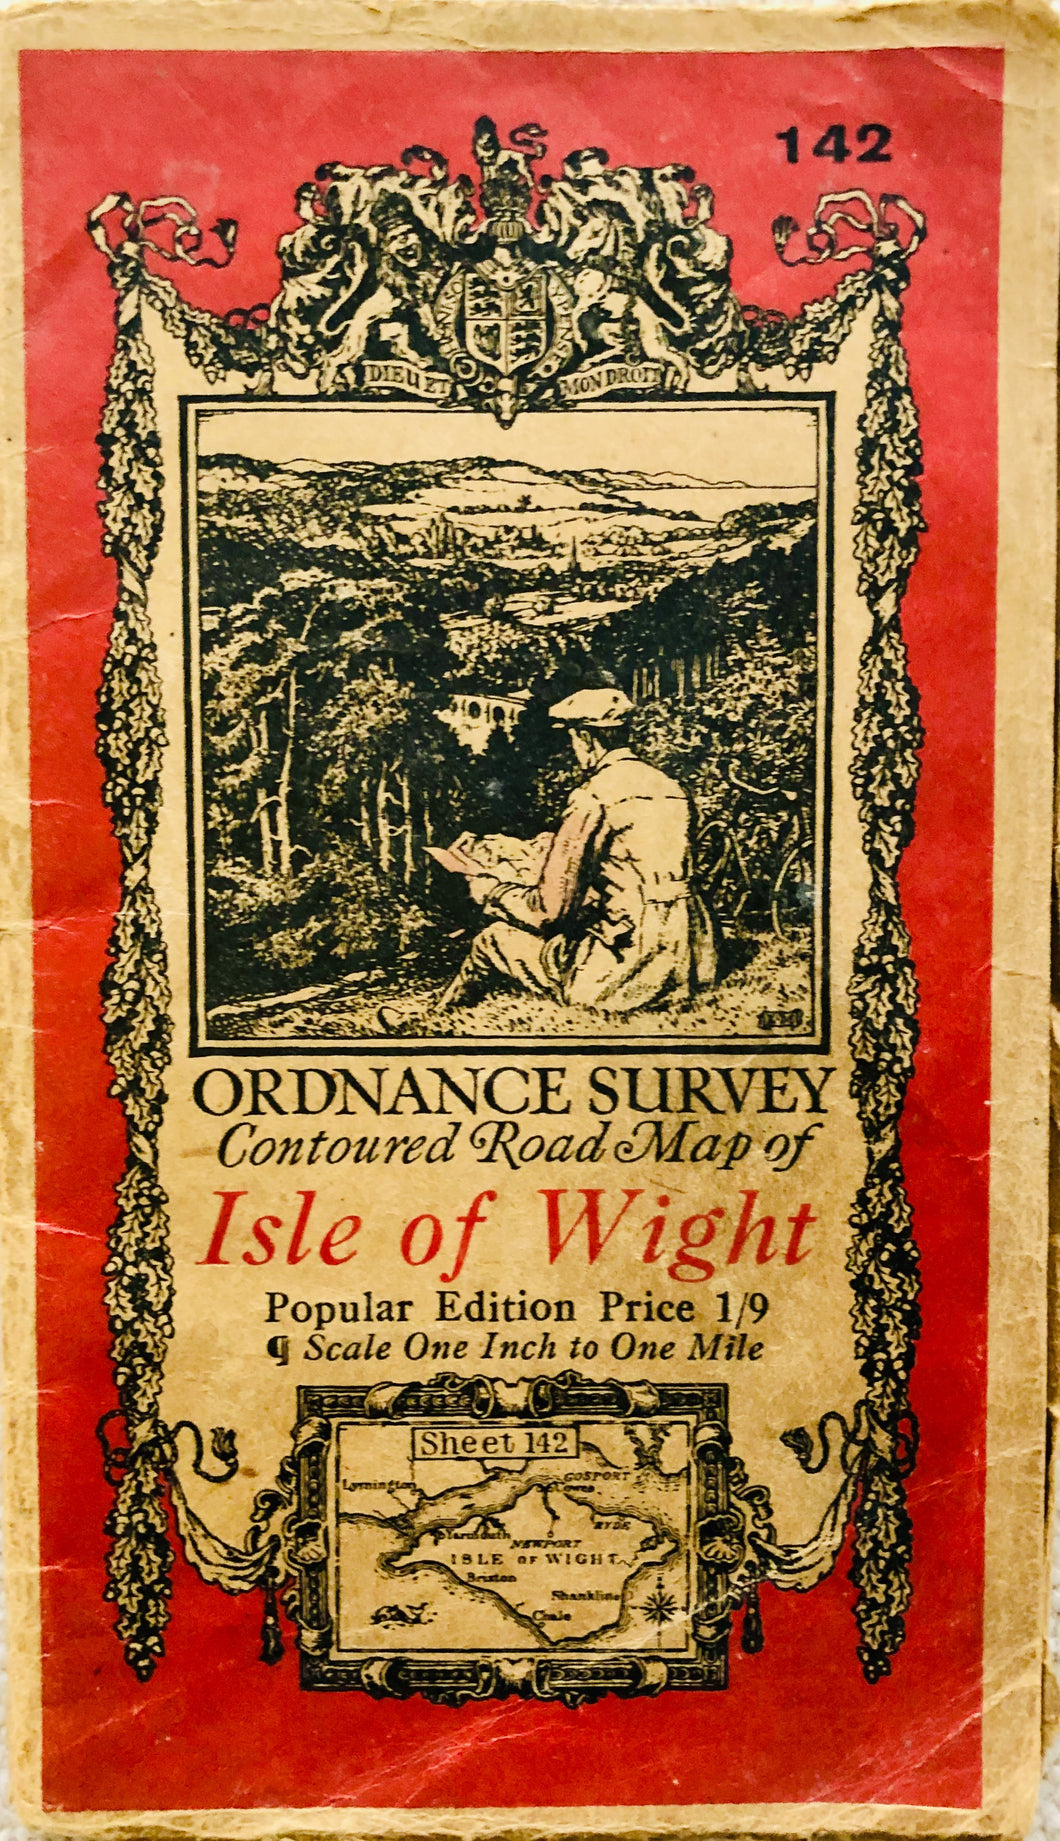 Ordnance Survey Map of the Isle of Wight, published and printed c.1932